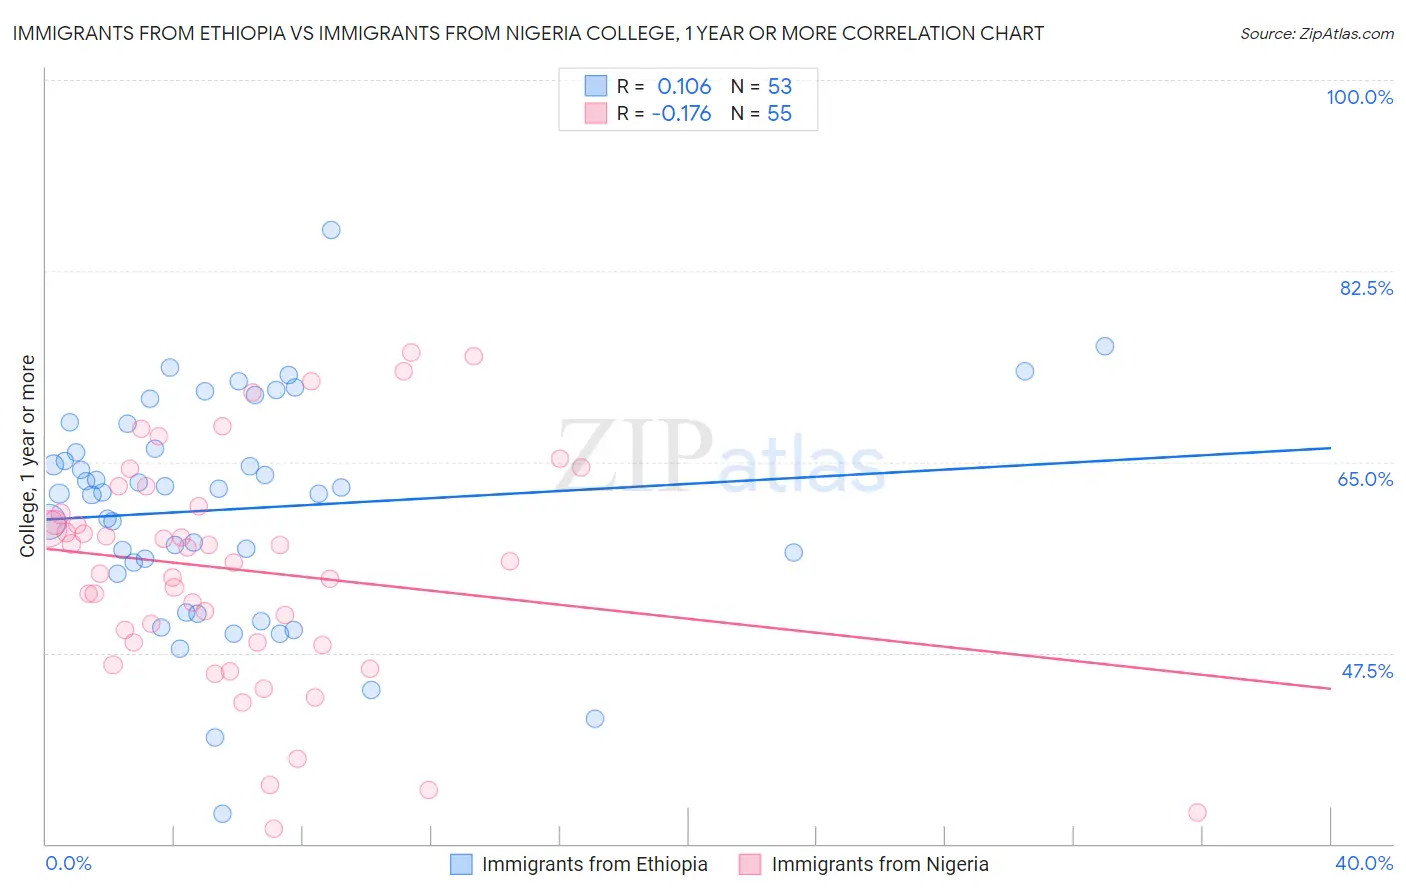 Immigrants from Ethiopia vs Immigrants from Nigeria College, 1 year or more